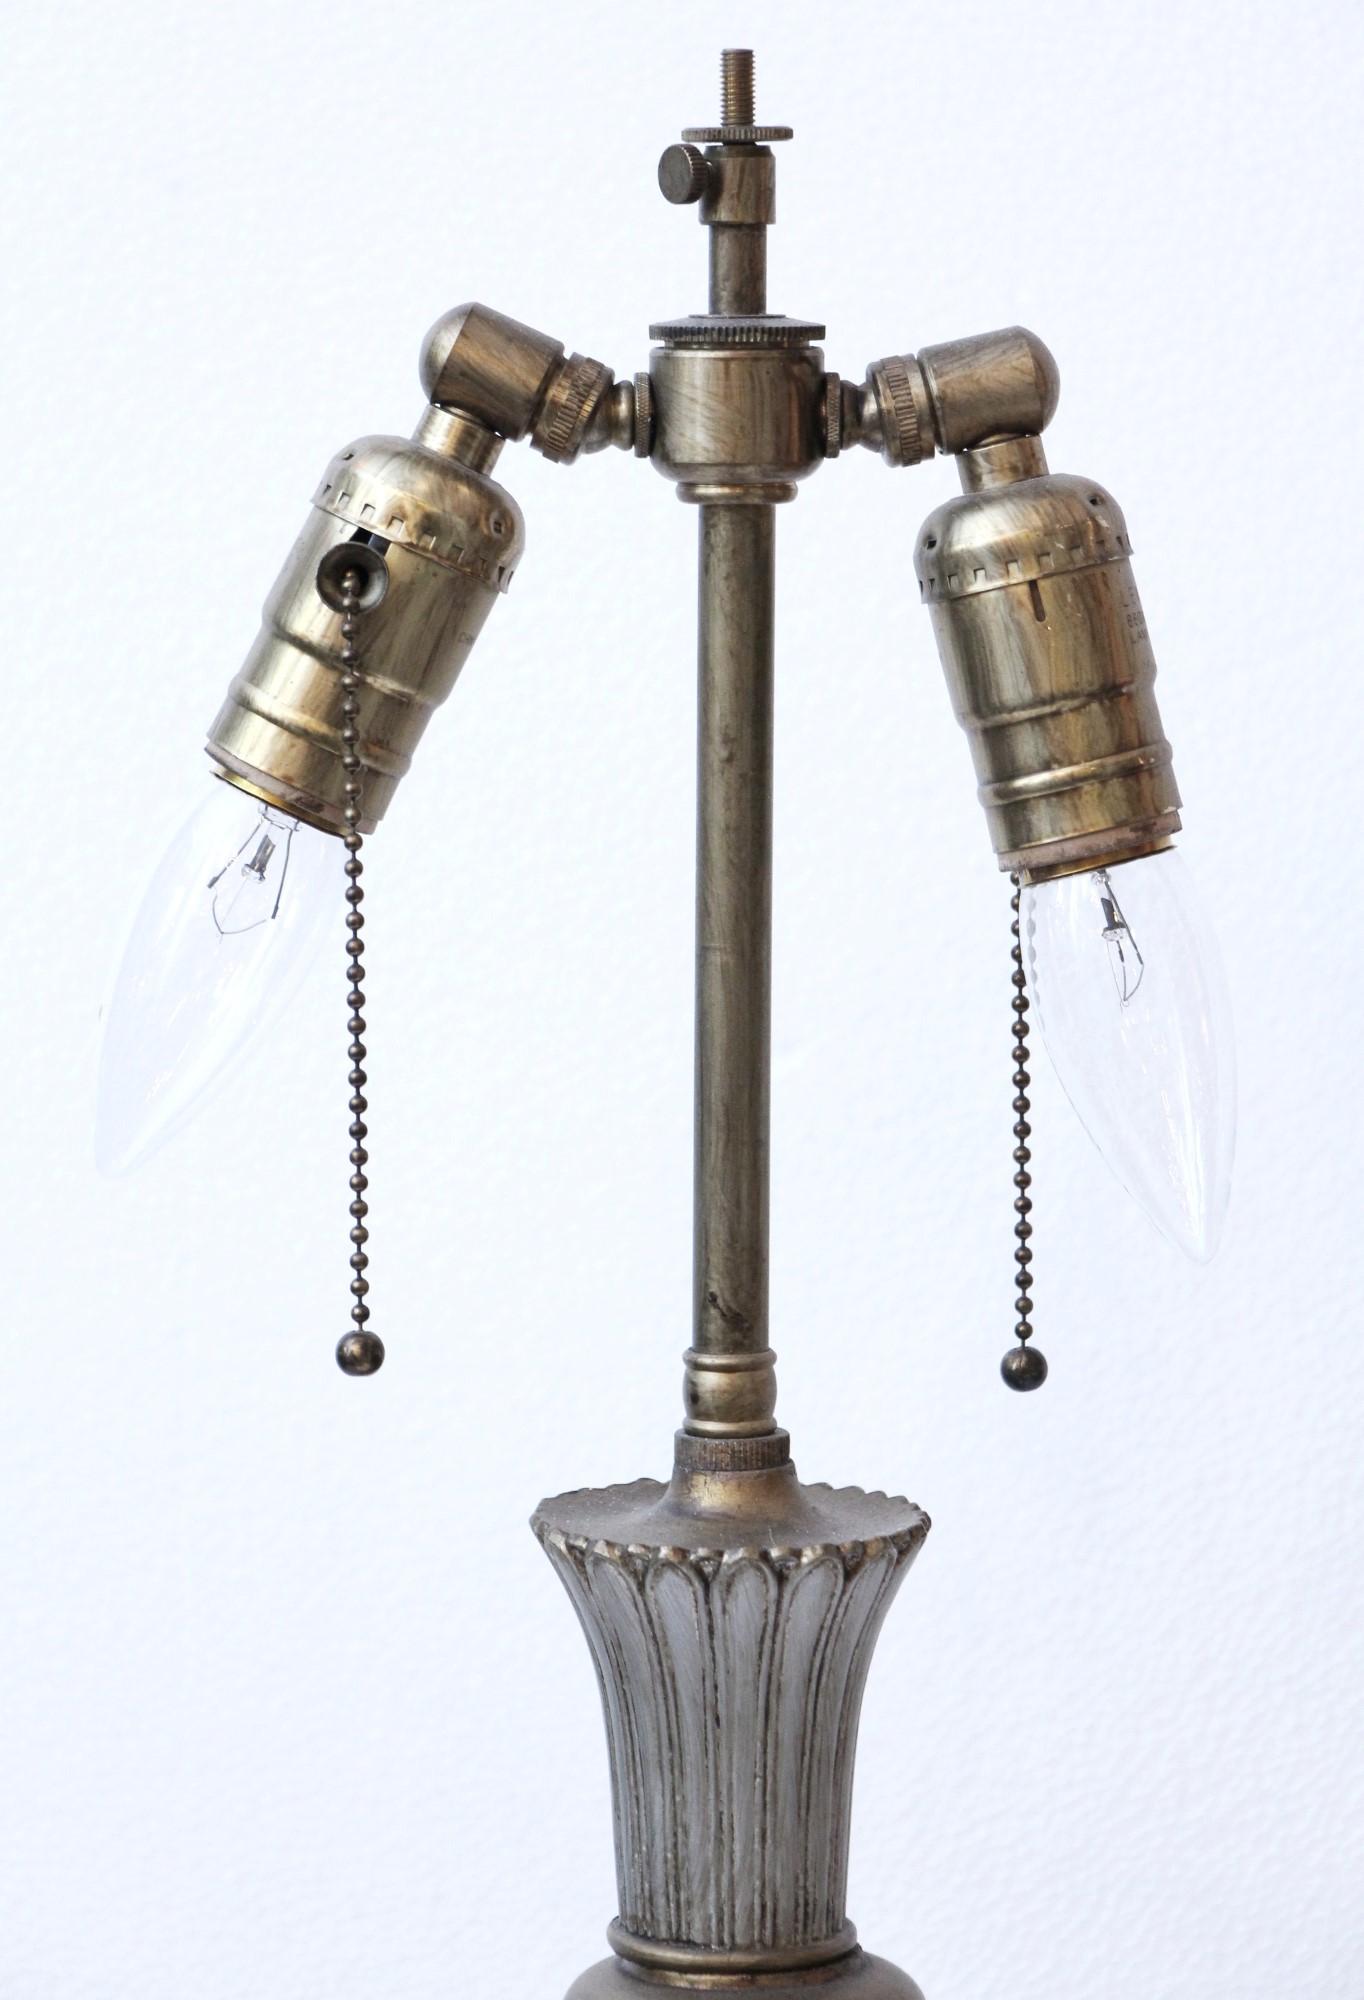 This 20th Century Georgian style lamp has a silver and gold finish over bronze. Comes with two adjustable sockets. Cleaned and rewired. Please note, this item is located in one of our NYC locations.